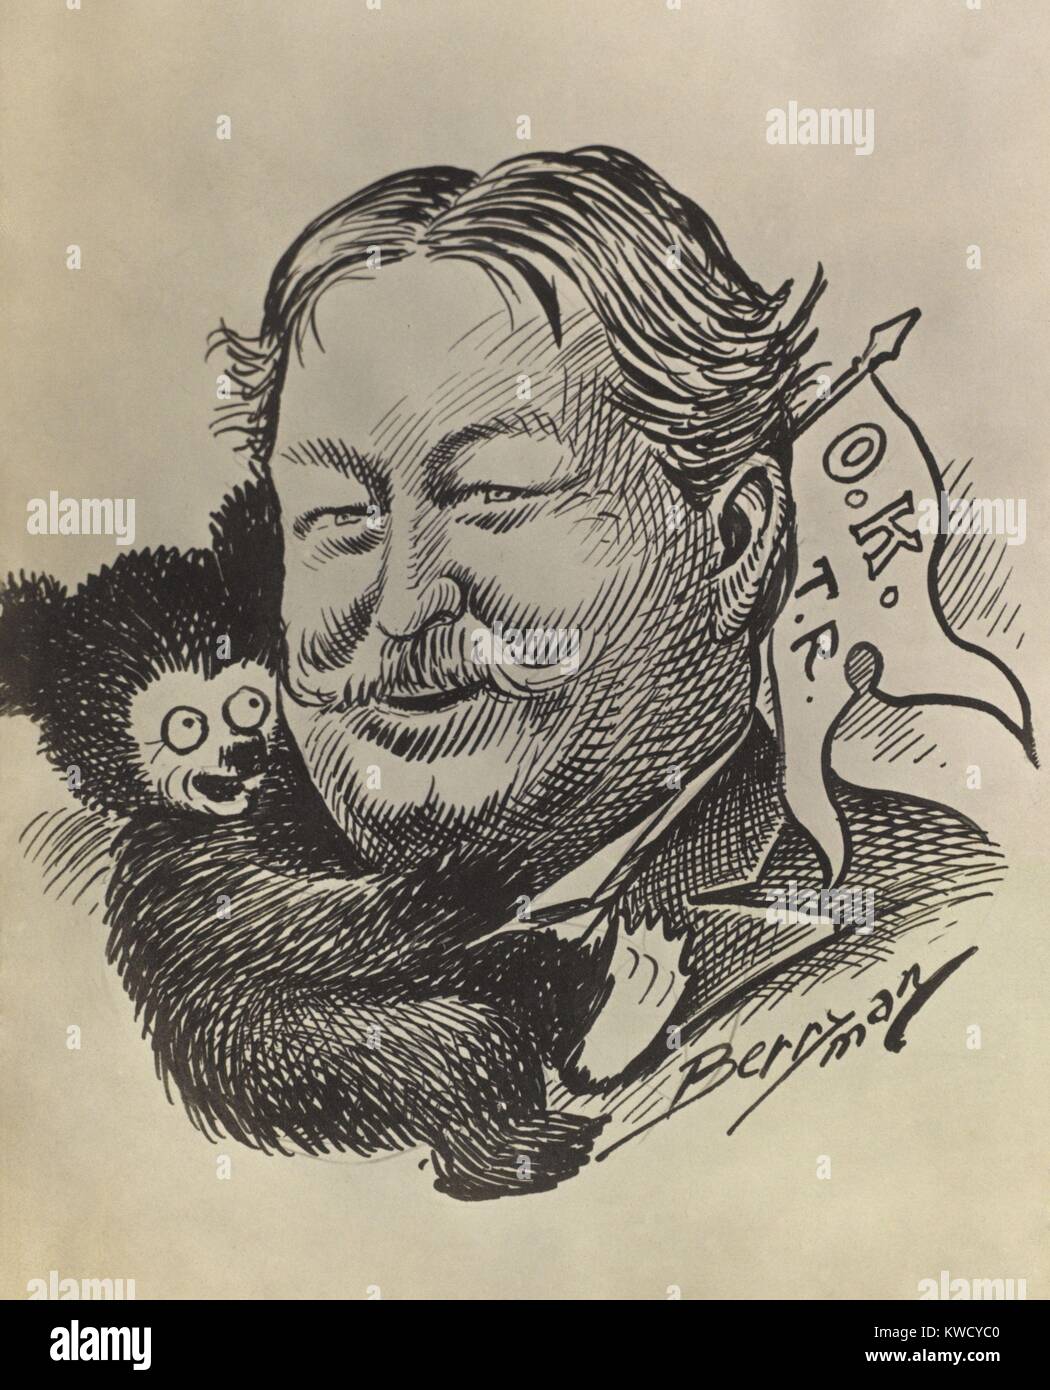 William Howard Taft, being hugged by Teddy Bear holding pennant O.K. T.R. Theodore Roosevelt championed Taft as his successor, favoring him over other Republican hopefuls including V.P. Charles Fairbanks, and N.Y. Governor Charles Evans Hughes (BSLOC 2017 2 101) Stock Photo